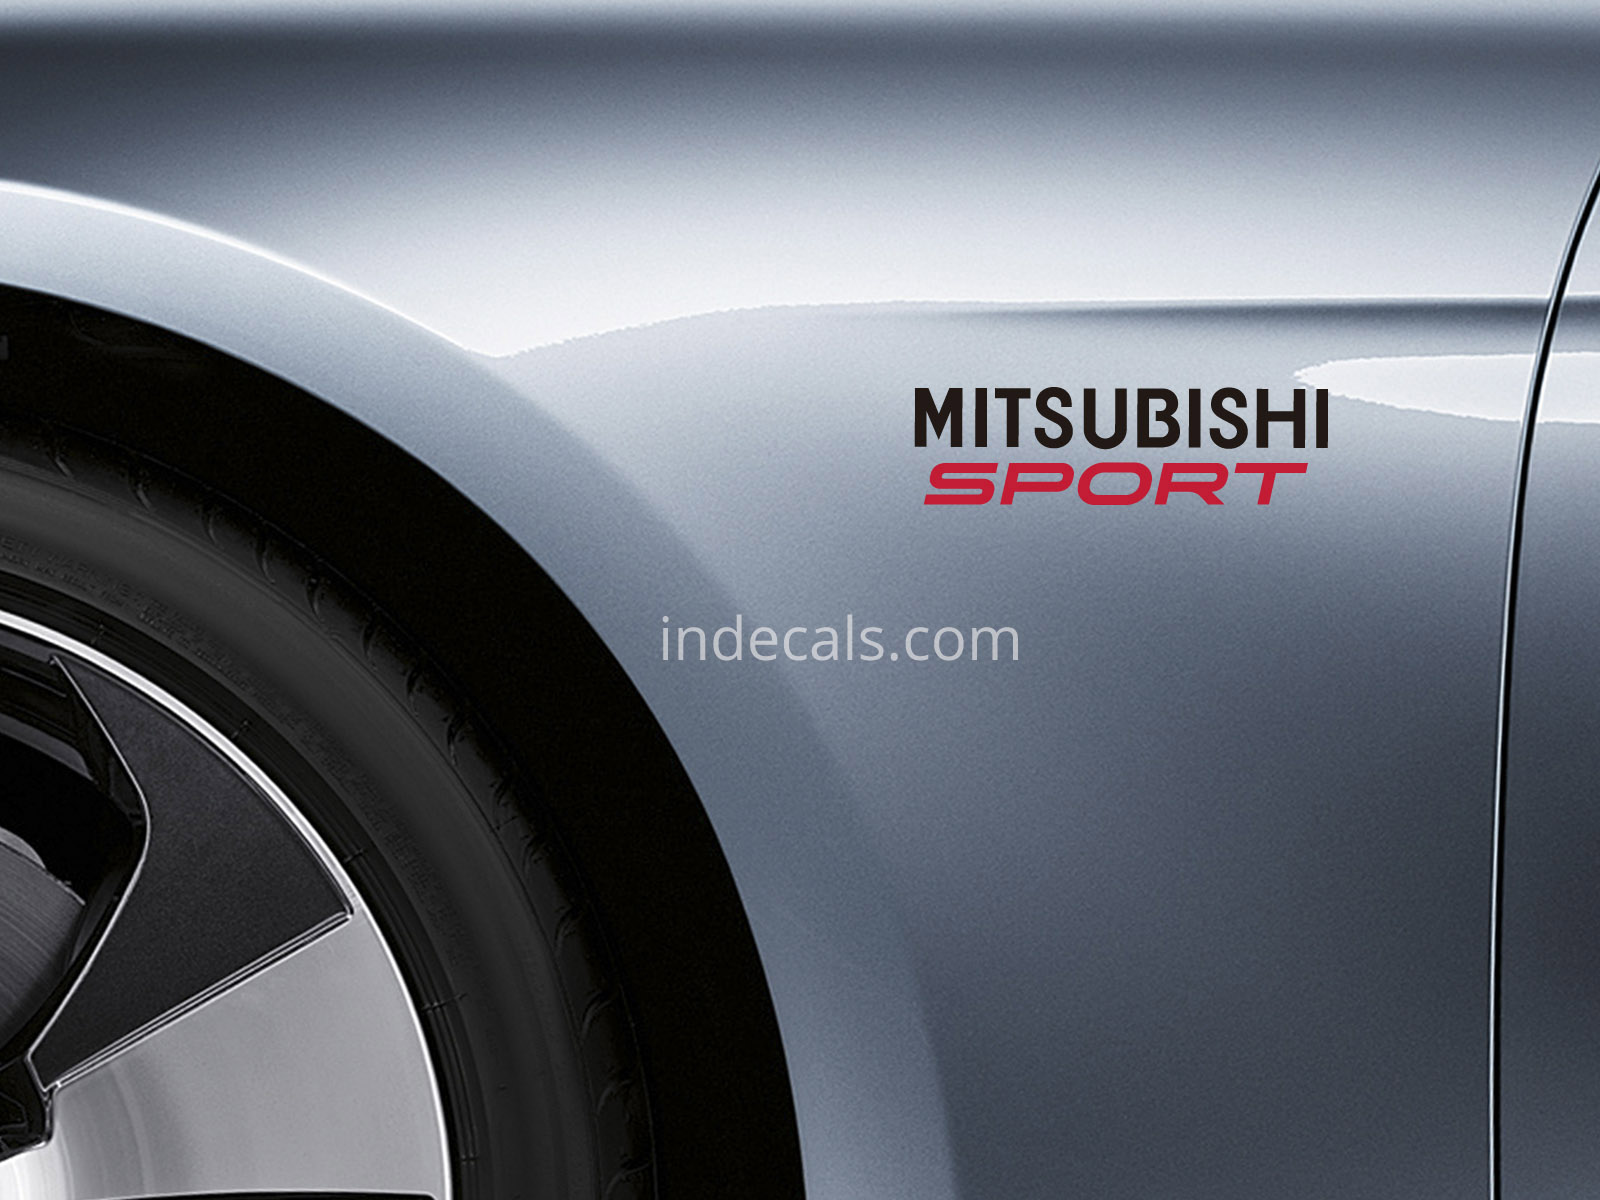 2 x Mitsubishi Sports stickers for Wings - Black & Red